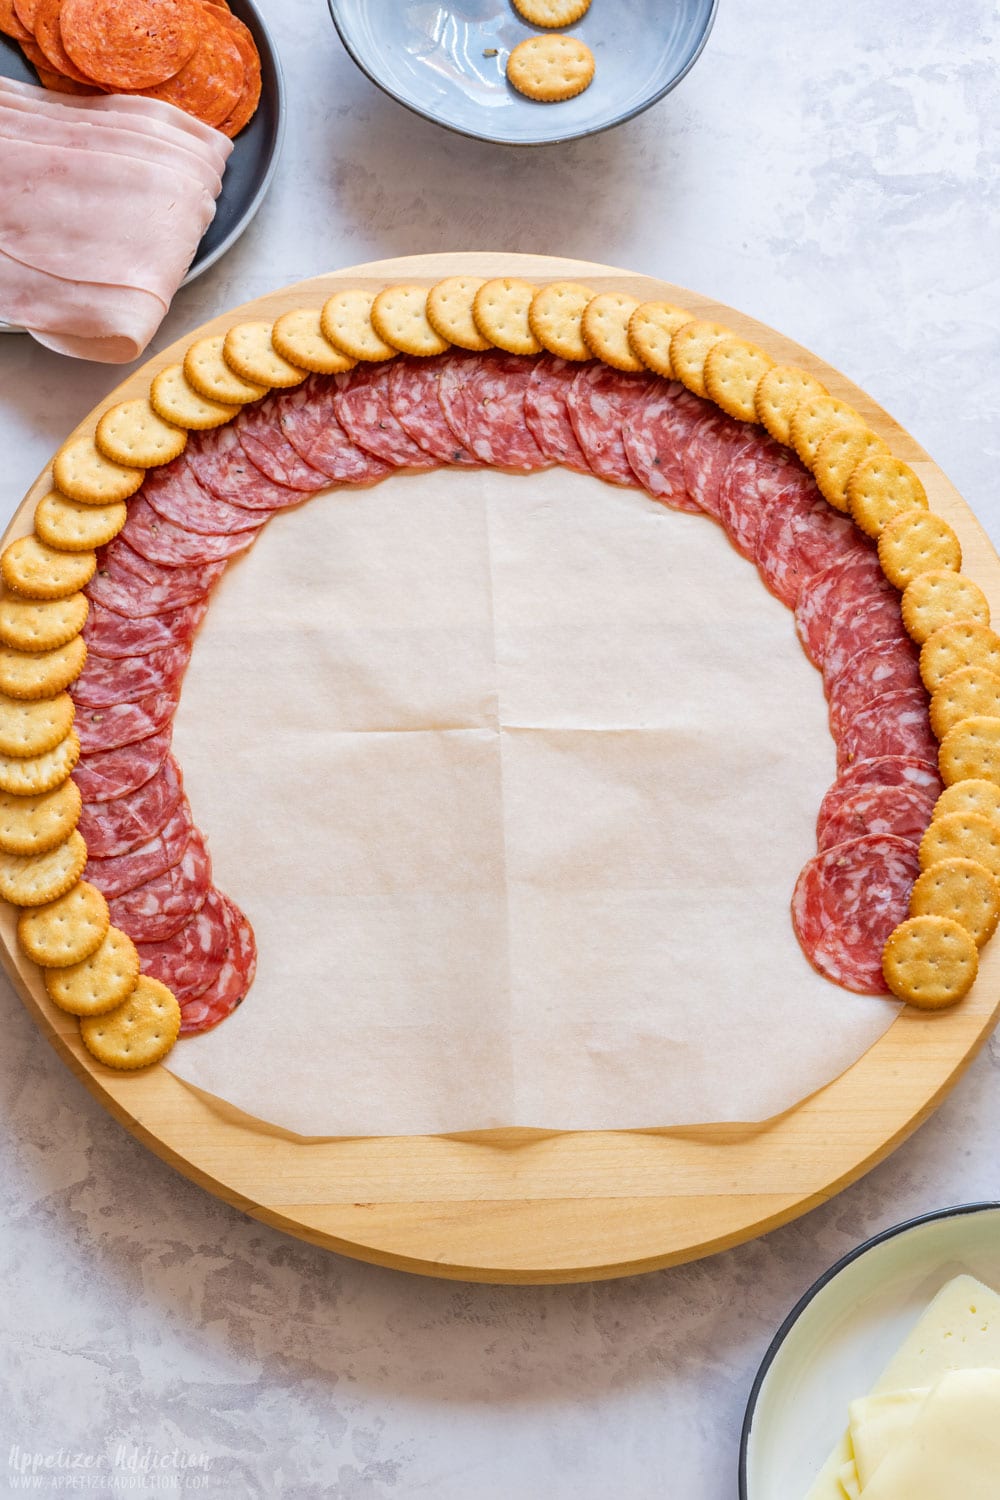 Salami slices and Ritz crackers arranged on the platter in a half circle.